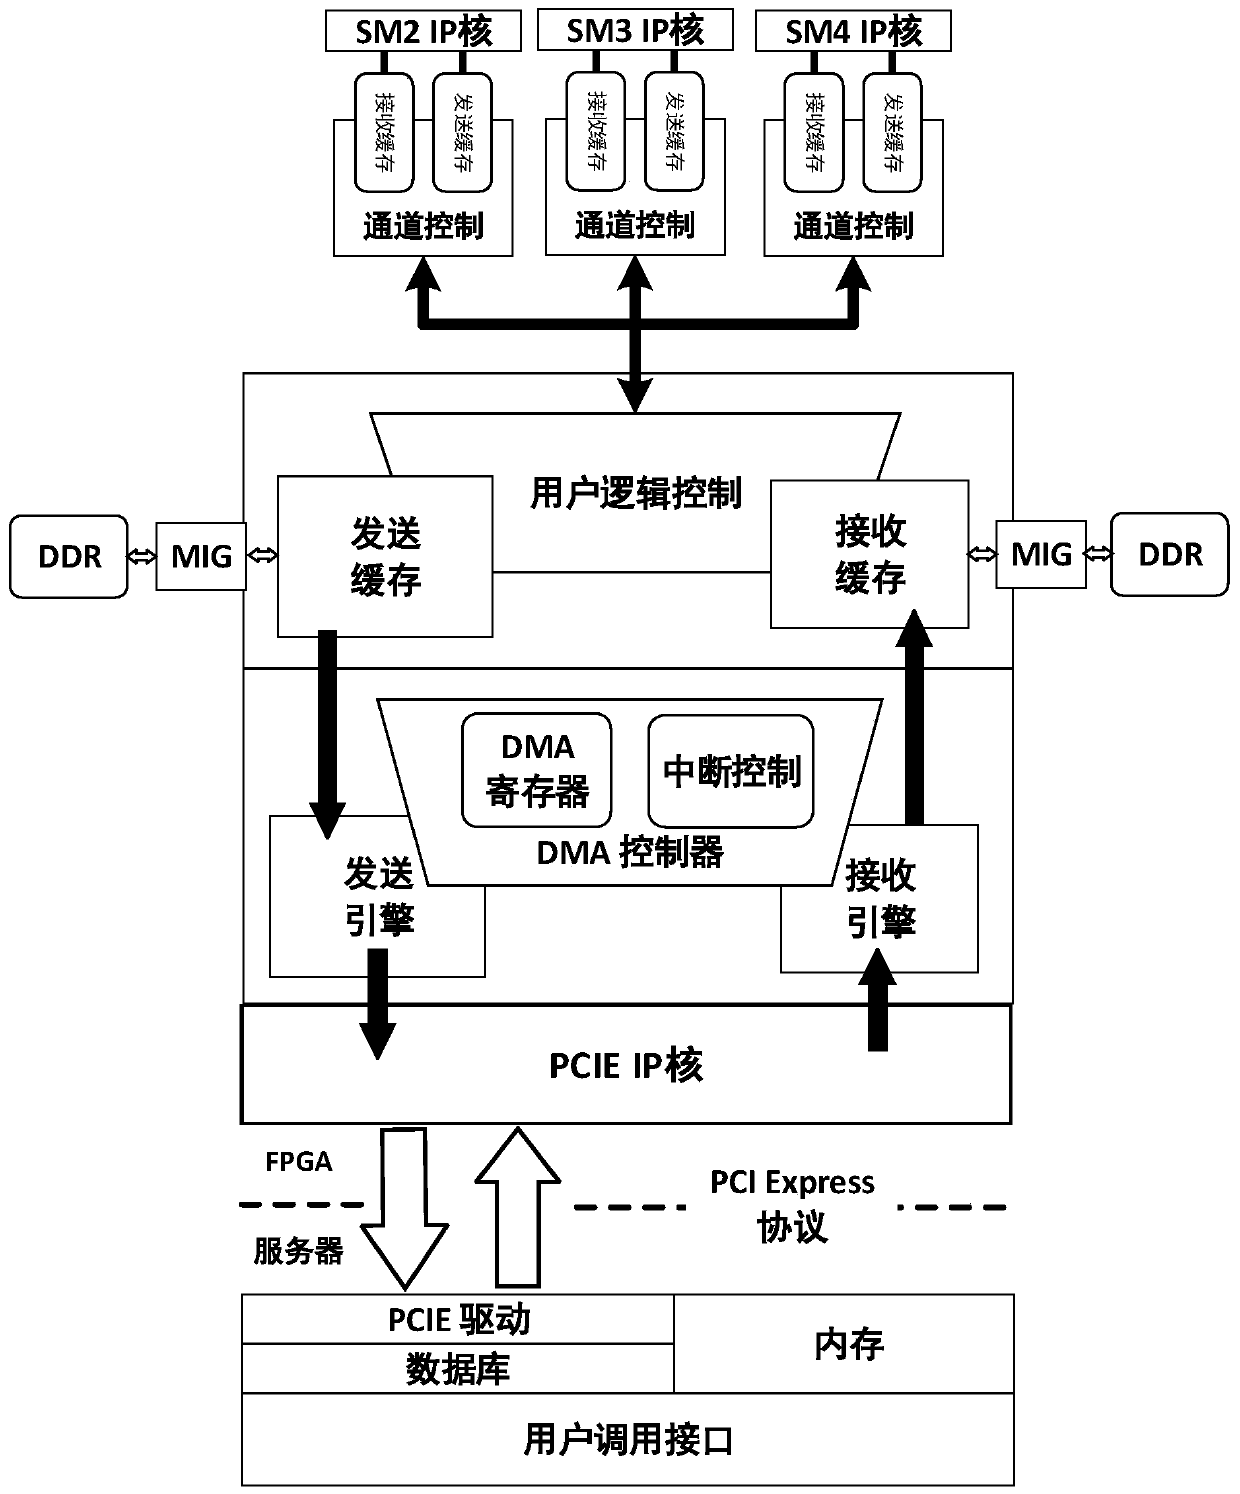 A national cryptographic algorithm acceleration processing system based on an FPGA